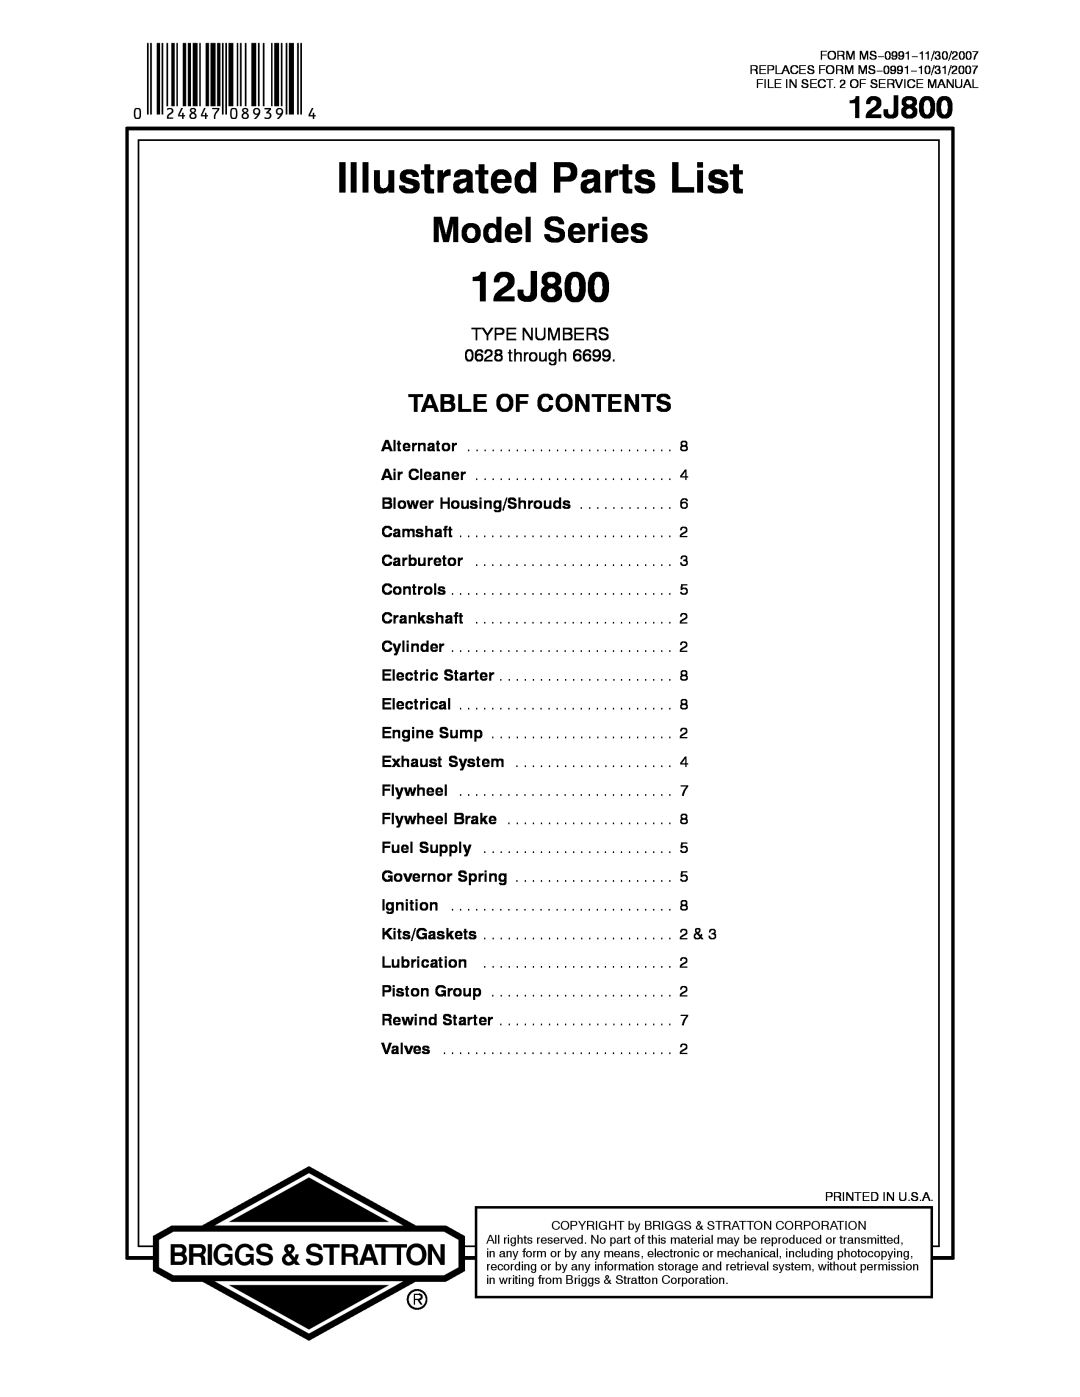 Briggs & Stratton 12J800 service manual Illustrated Parts List, Model Series, Table Of Contents, TYPE NUMBERS 0628 through 